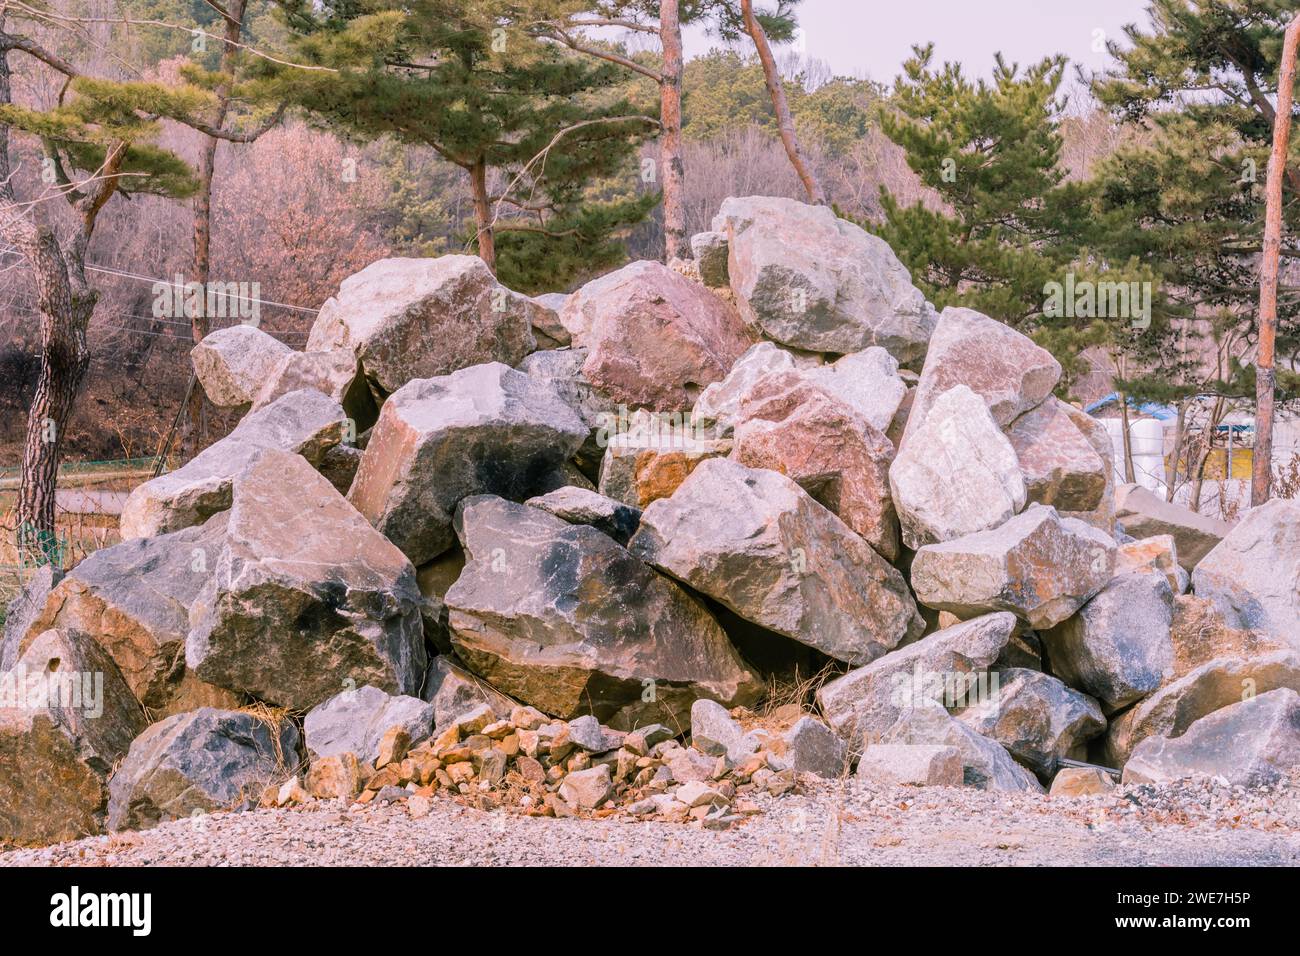 Closeup of large pile of boulders in countryside with evergreen trees in background in South Korea Stock Photo